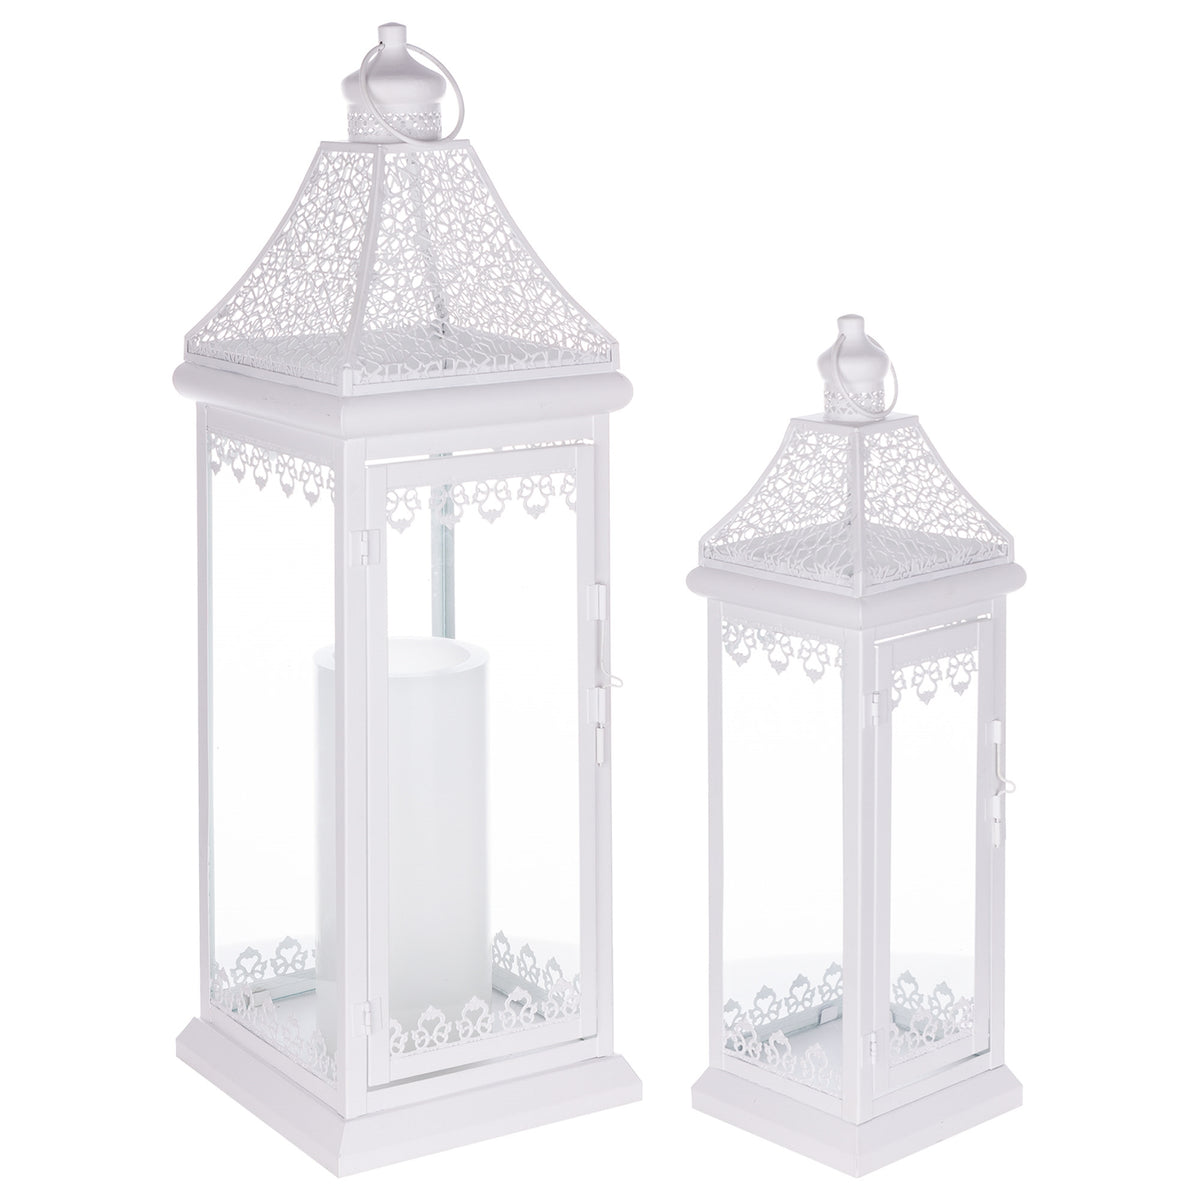 Lacey Metal Candle Lanterns, Set of 2 - Adley & Company Inc. 